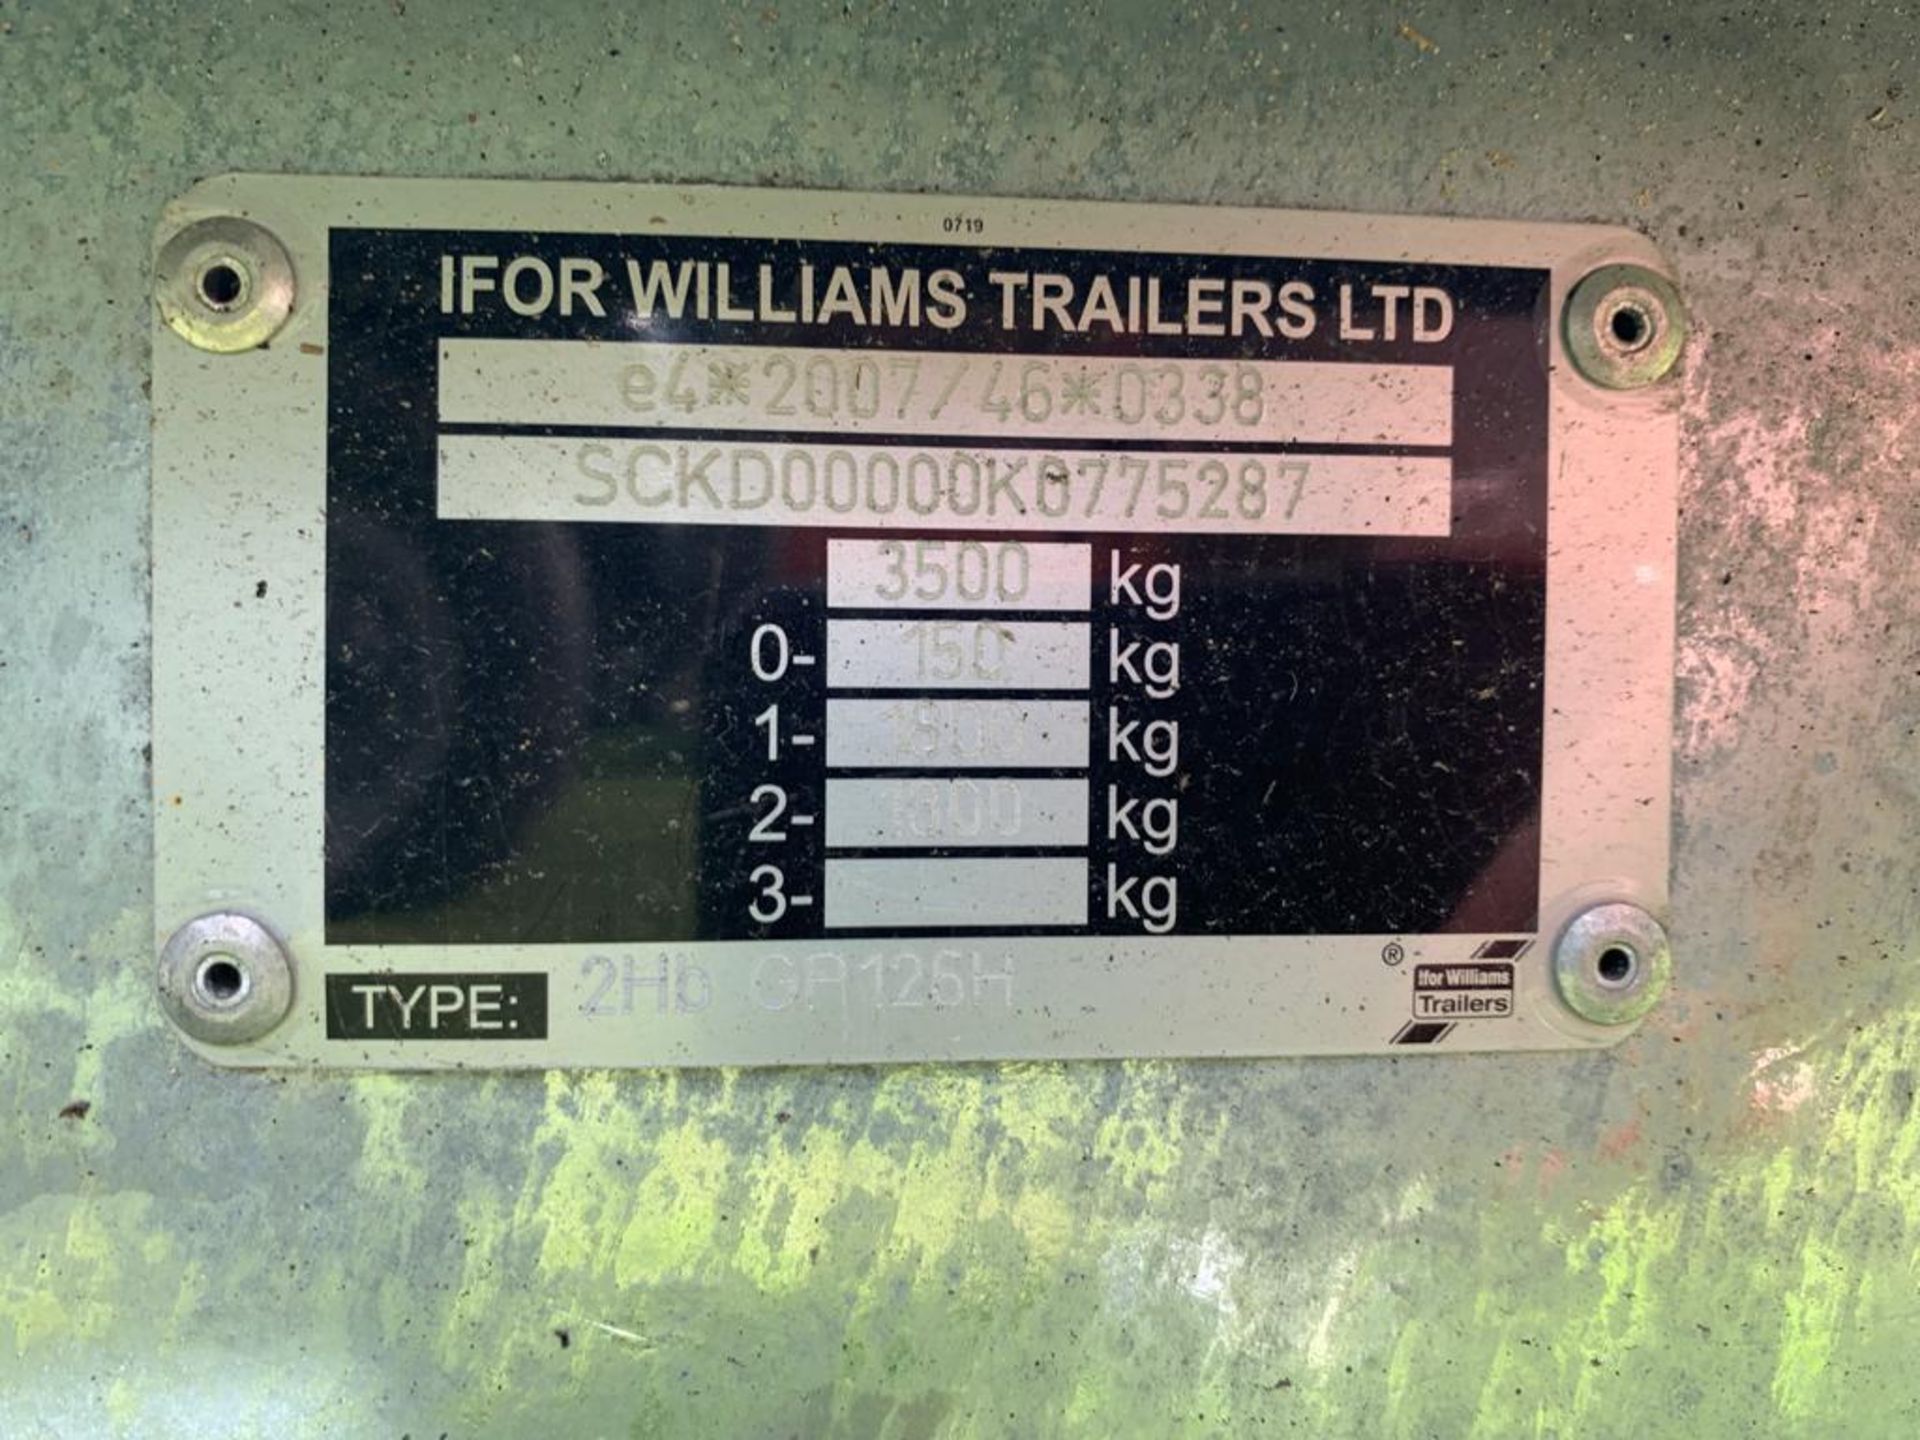 2020 IFOR WILLIAMS 12FT X 6FT TWIN AXLE 3500KG PLANT TRAILER, BRAND NEW RARE 16" WHEELS *PLUS VAT* - Image 7 of 8